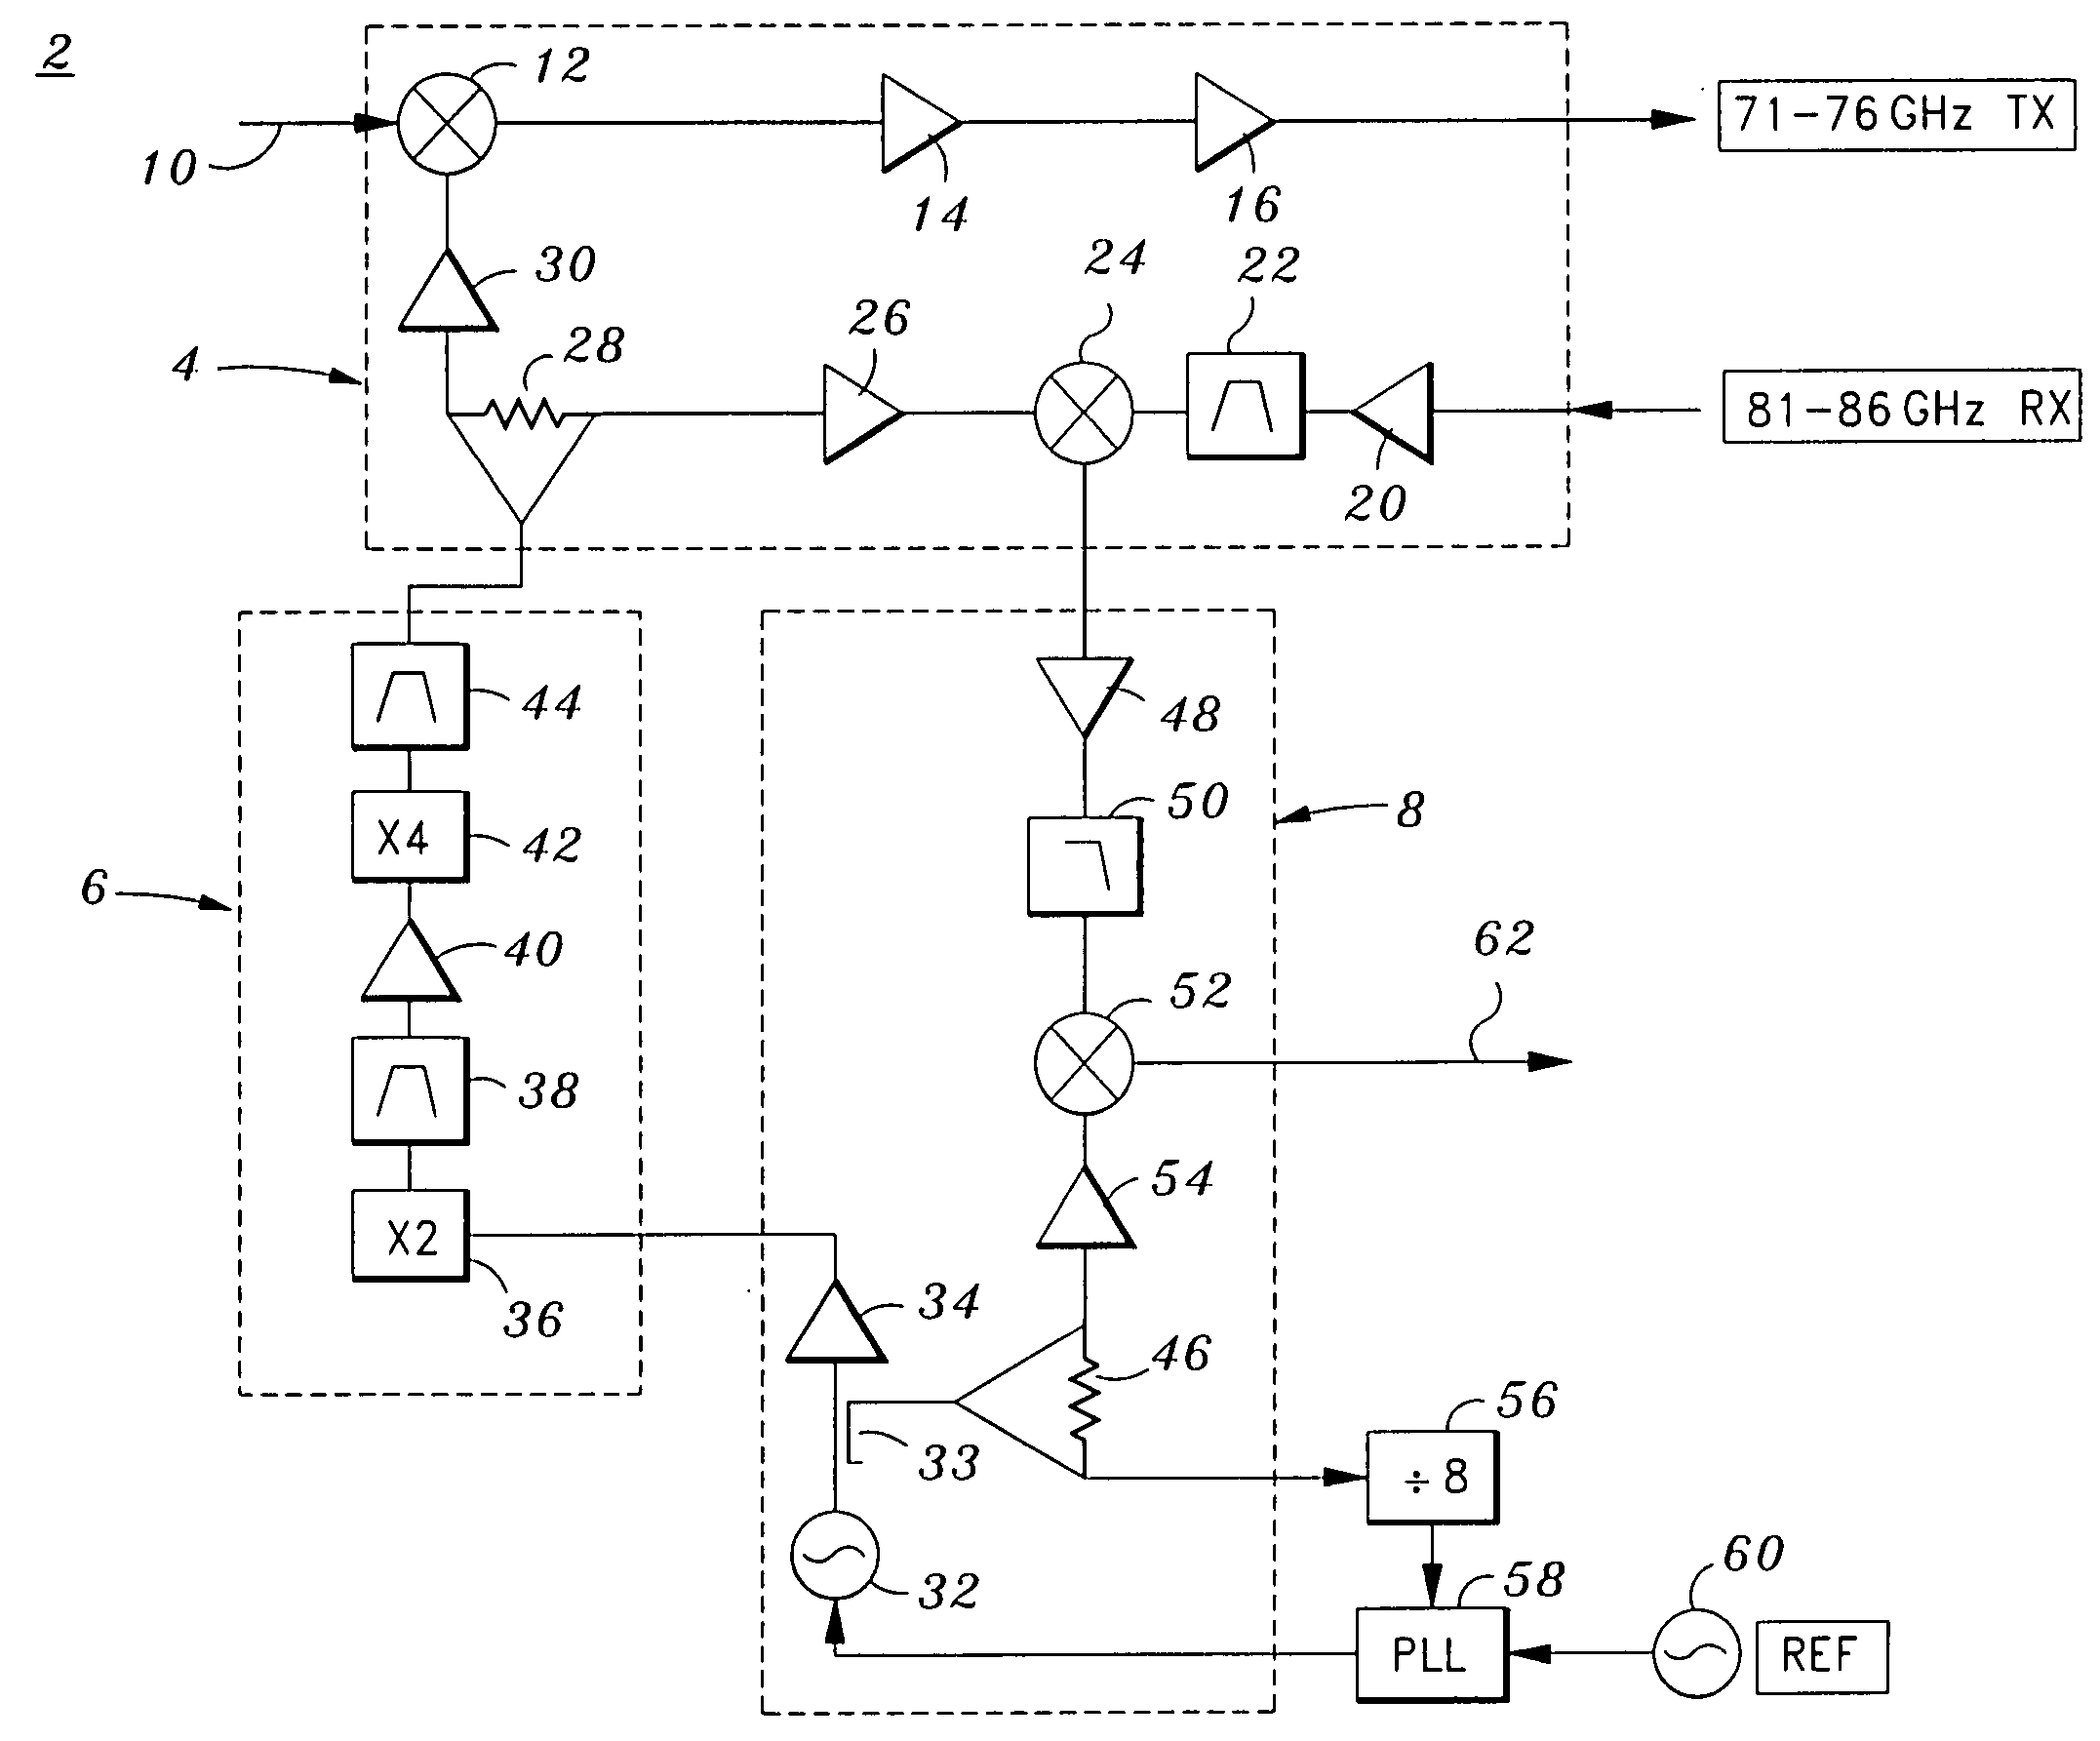 E-Band radio transceiver architecture and chip set